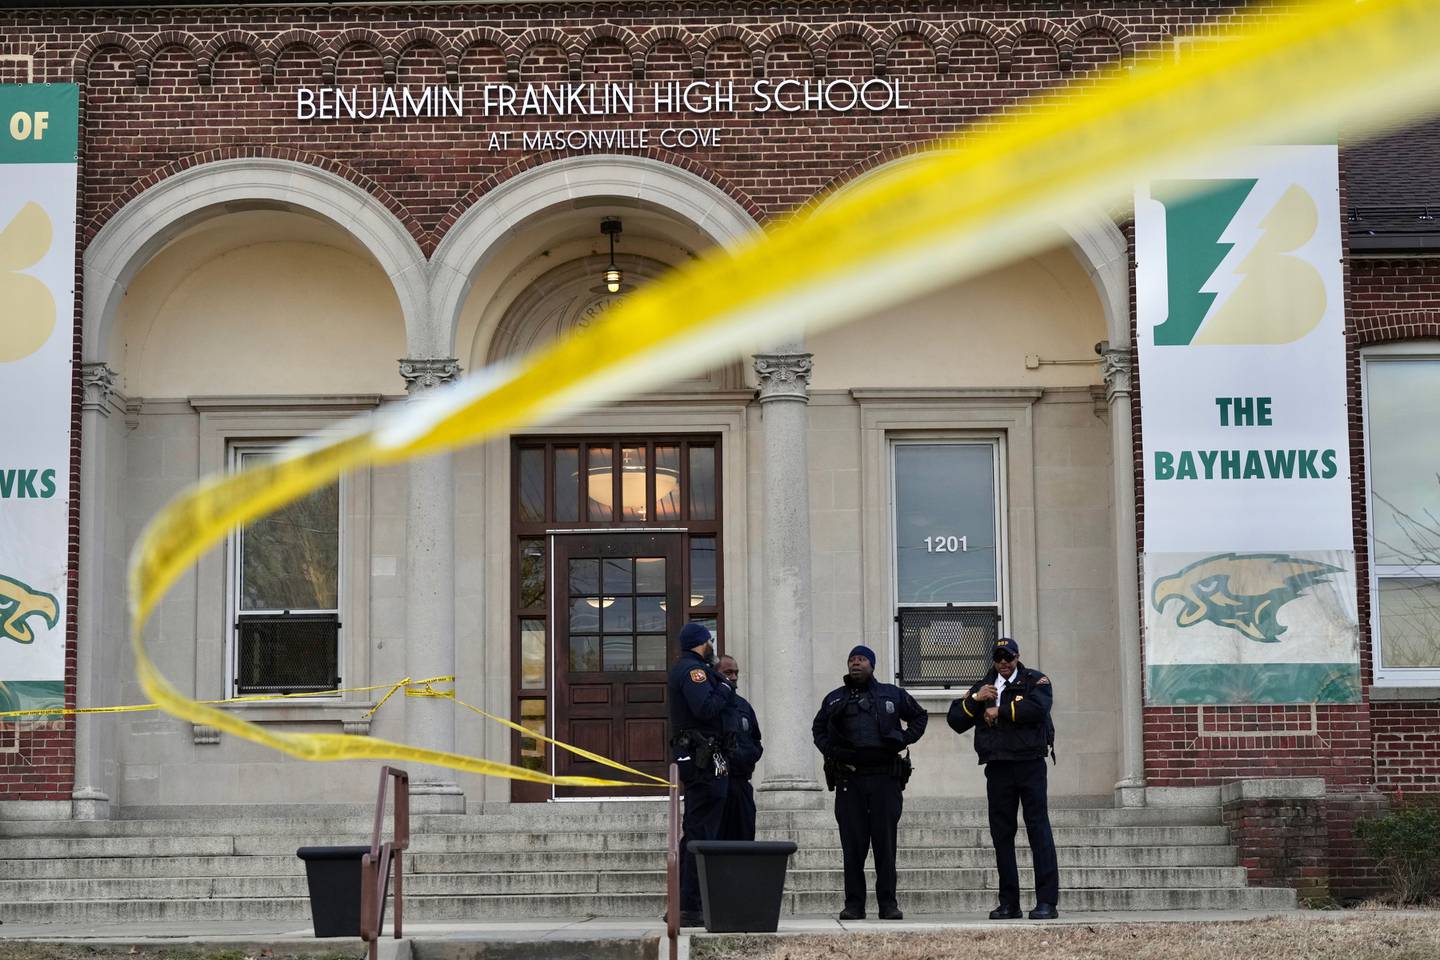 Shooting at Benjamin Franklin High School is the second school shooting during the first week of 2023.